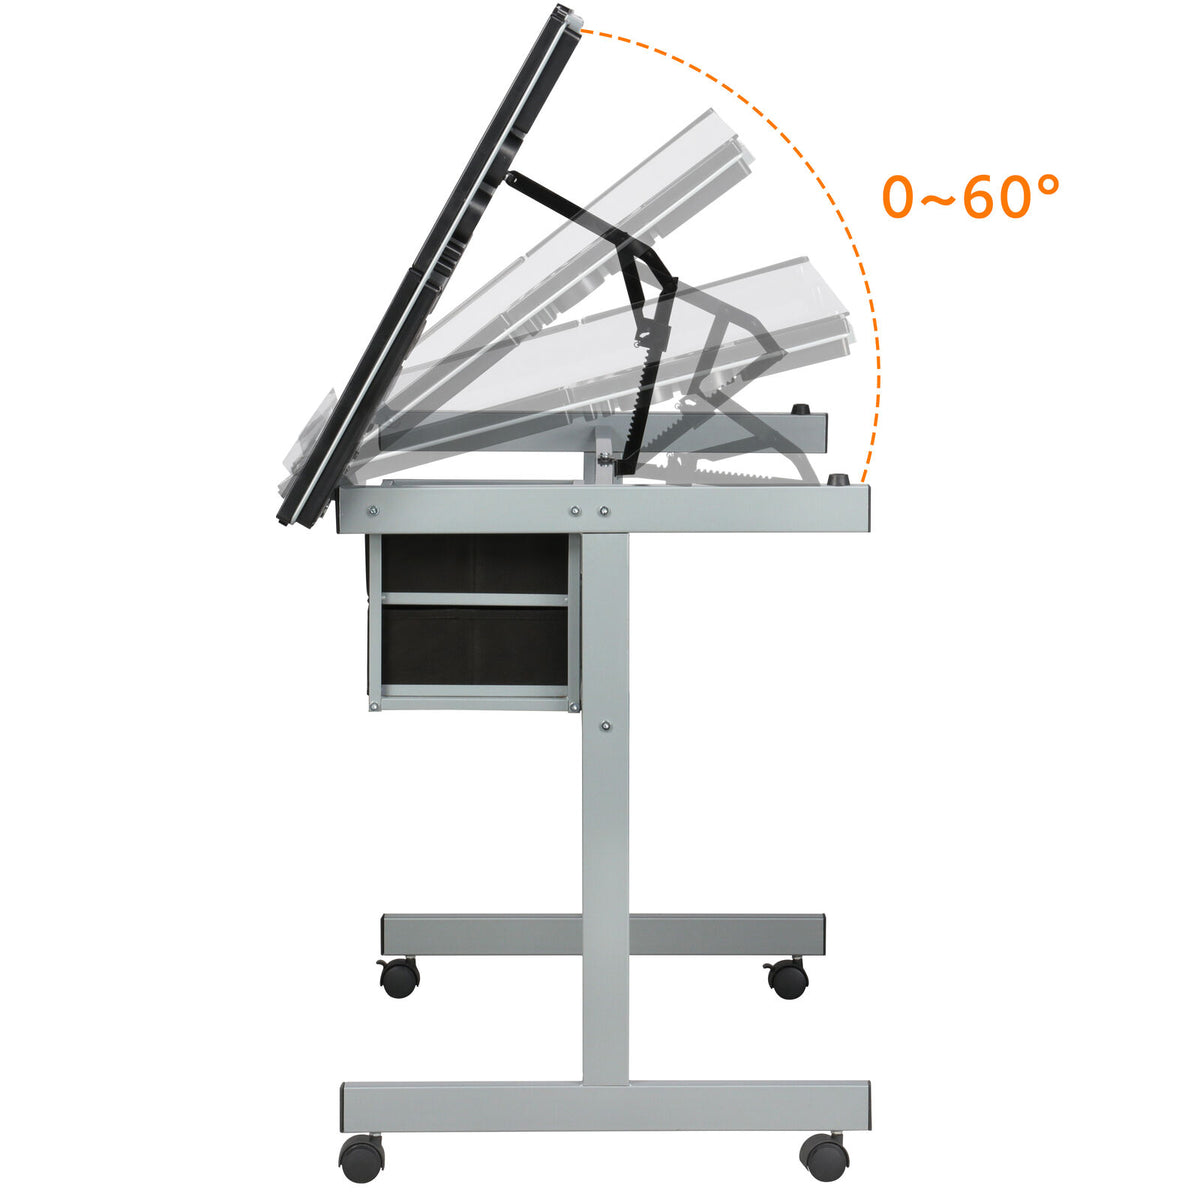 Home Office Adjustable Table - cloudysage